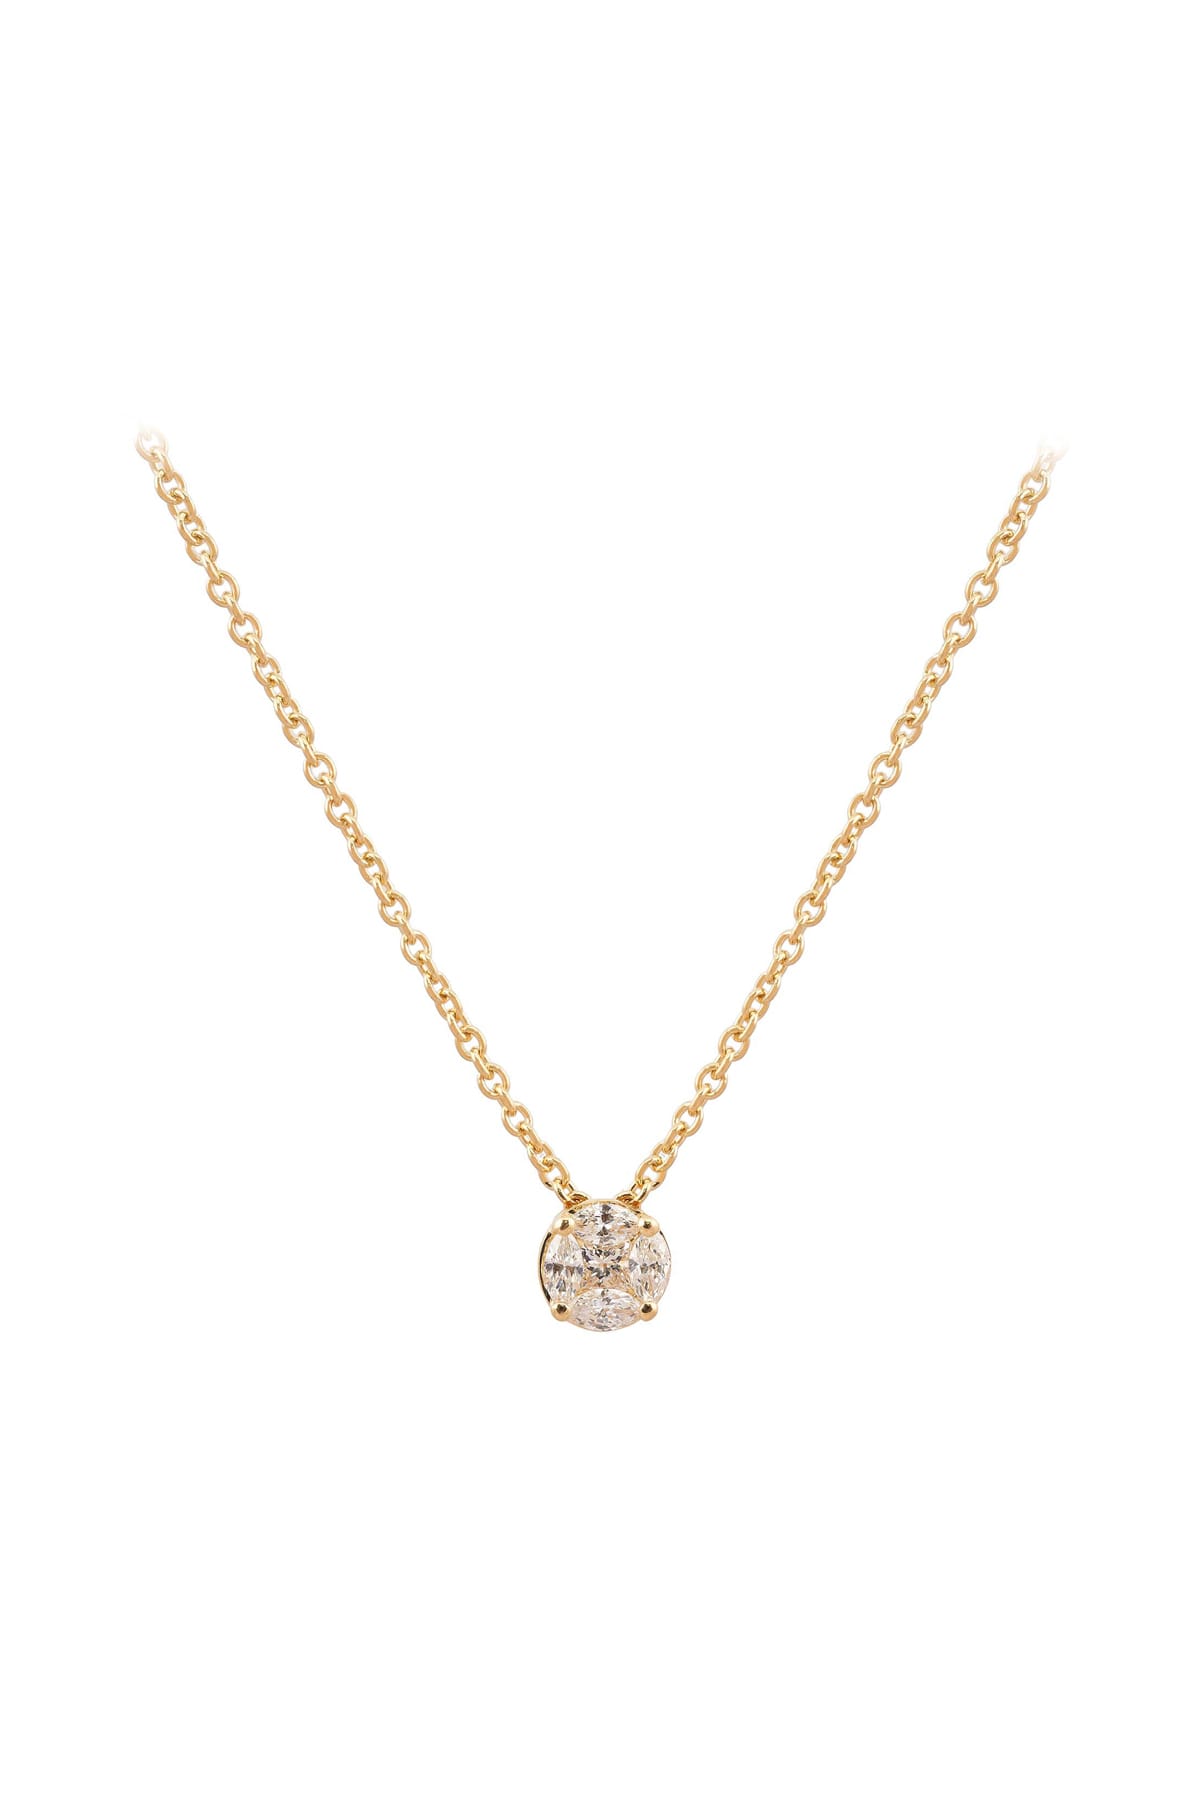 Marquise and Princess Cut Diamond Set Pendant with Chain set in 18ct Yellow Gold available at LeGassick Diamonds and Jewellery Gold Coast, Australia.